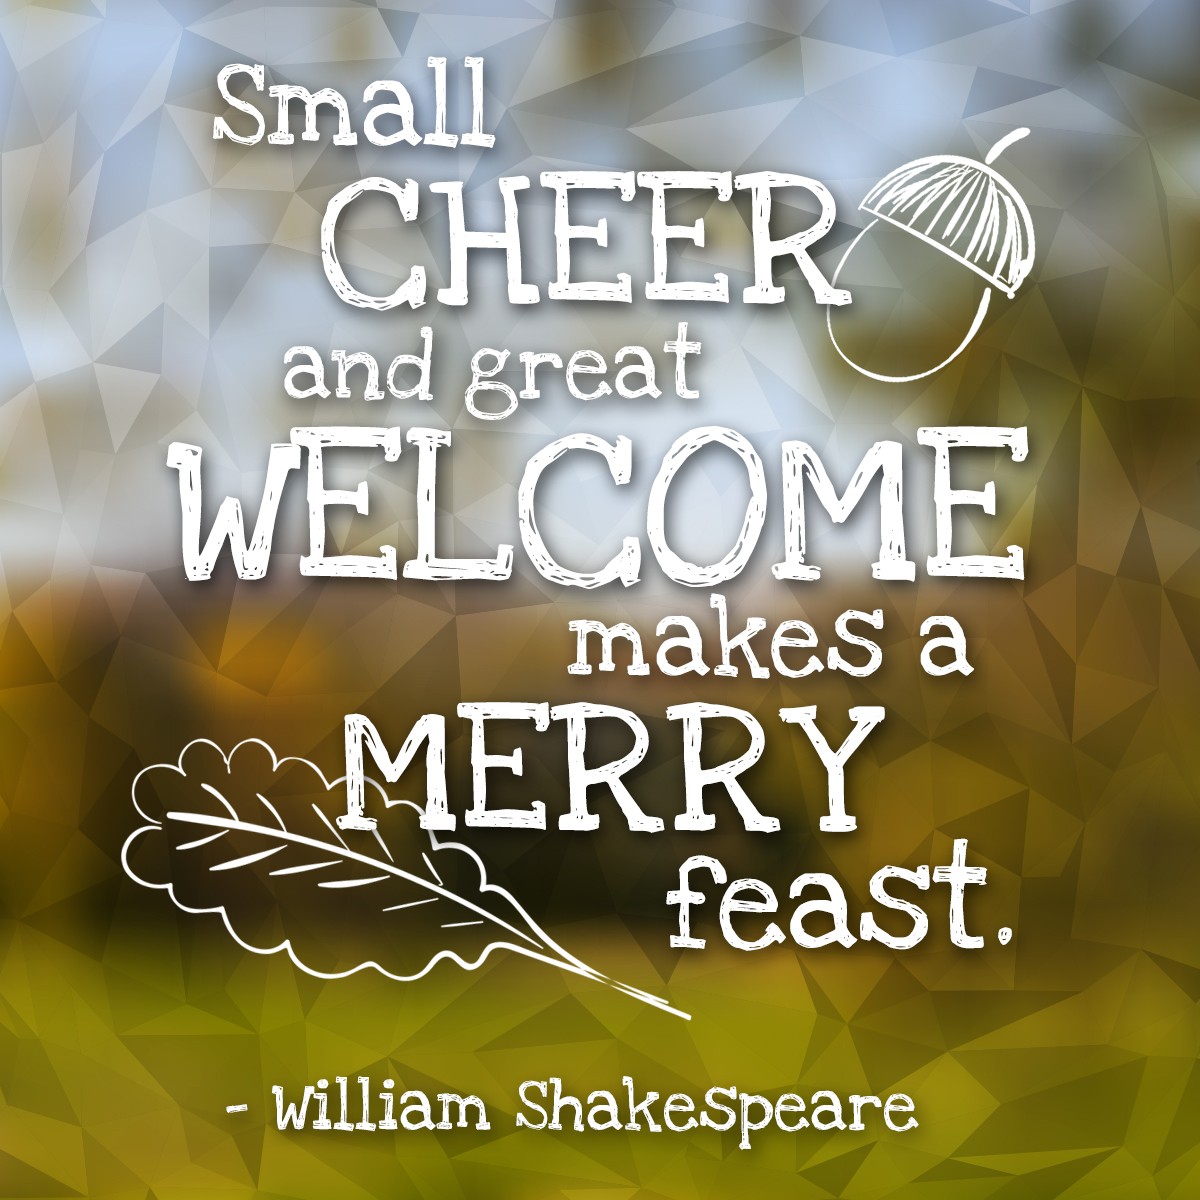 Small cheer and great welcome makes a merry feast. - William Shakespeare | MakeItGrateful.com